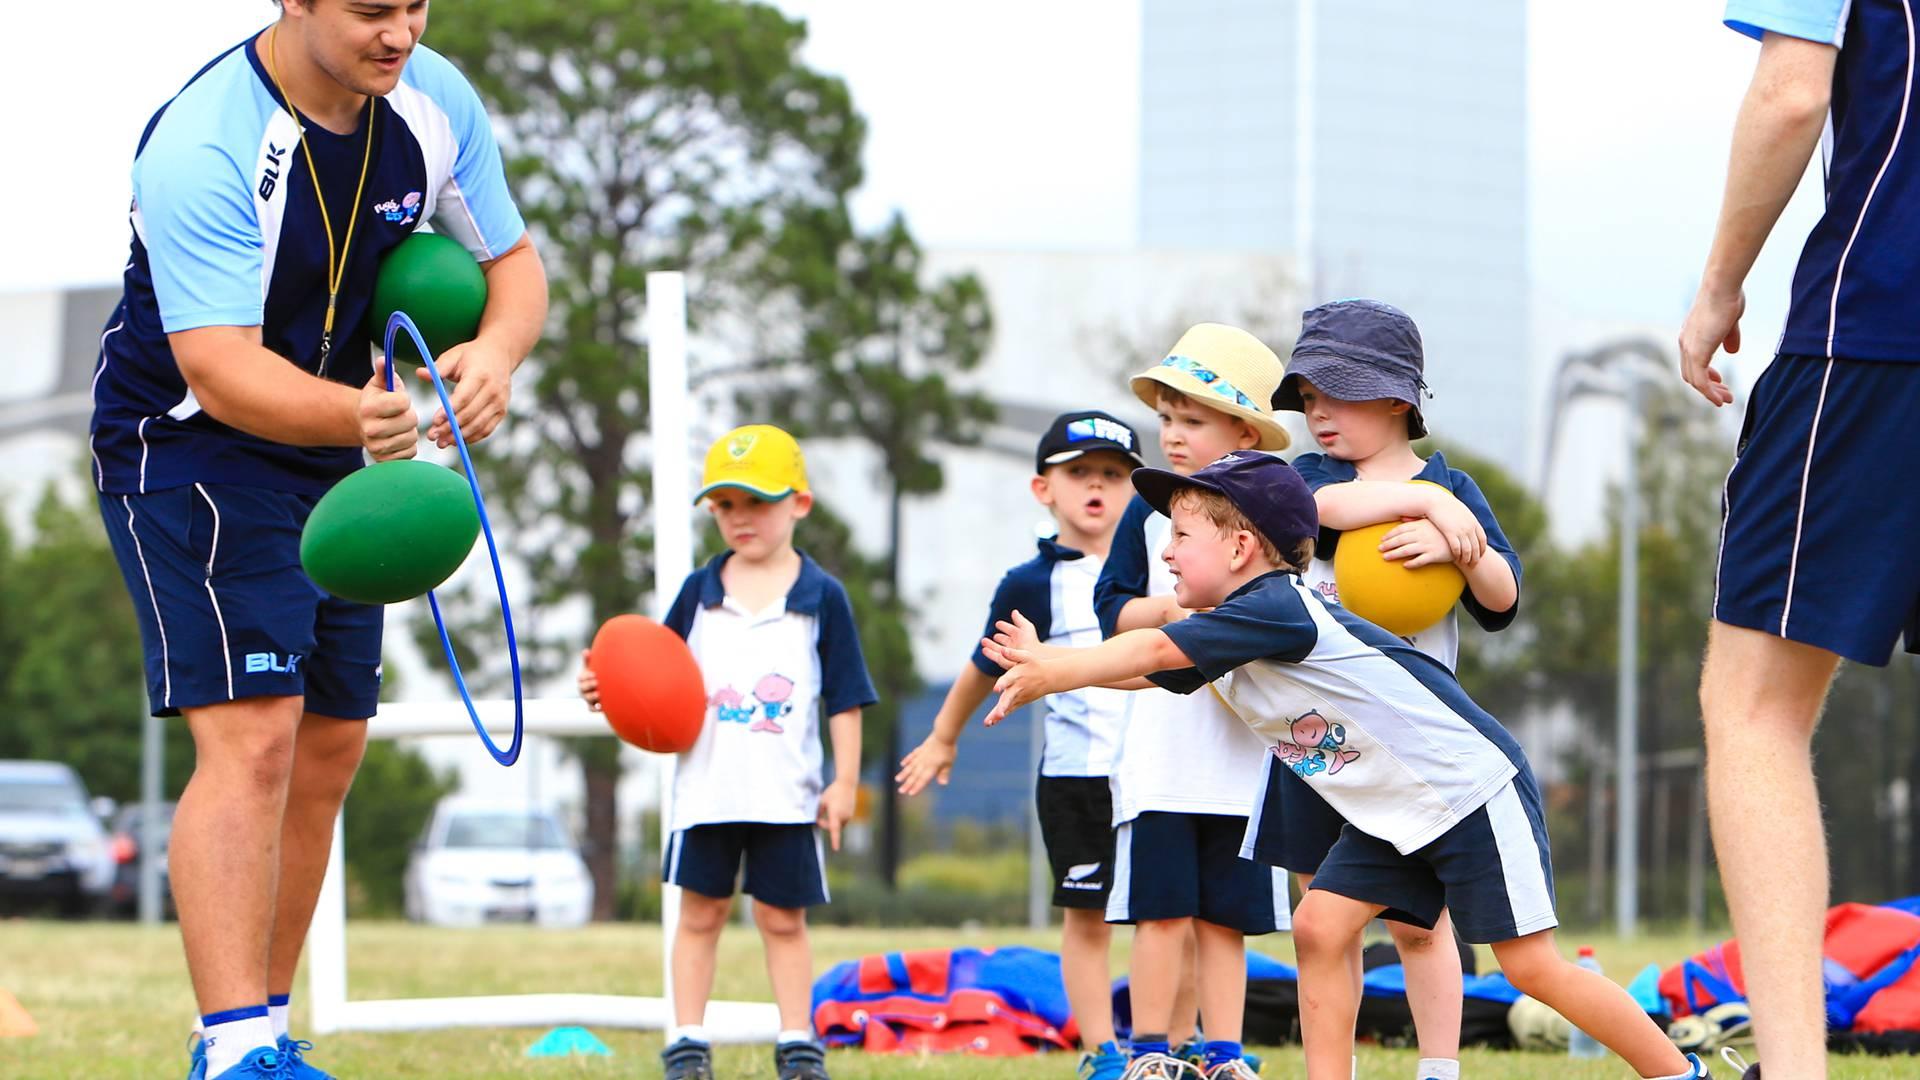 Rugbytots photo